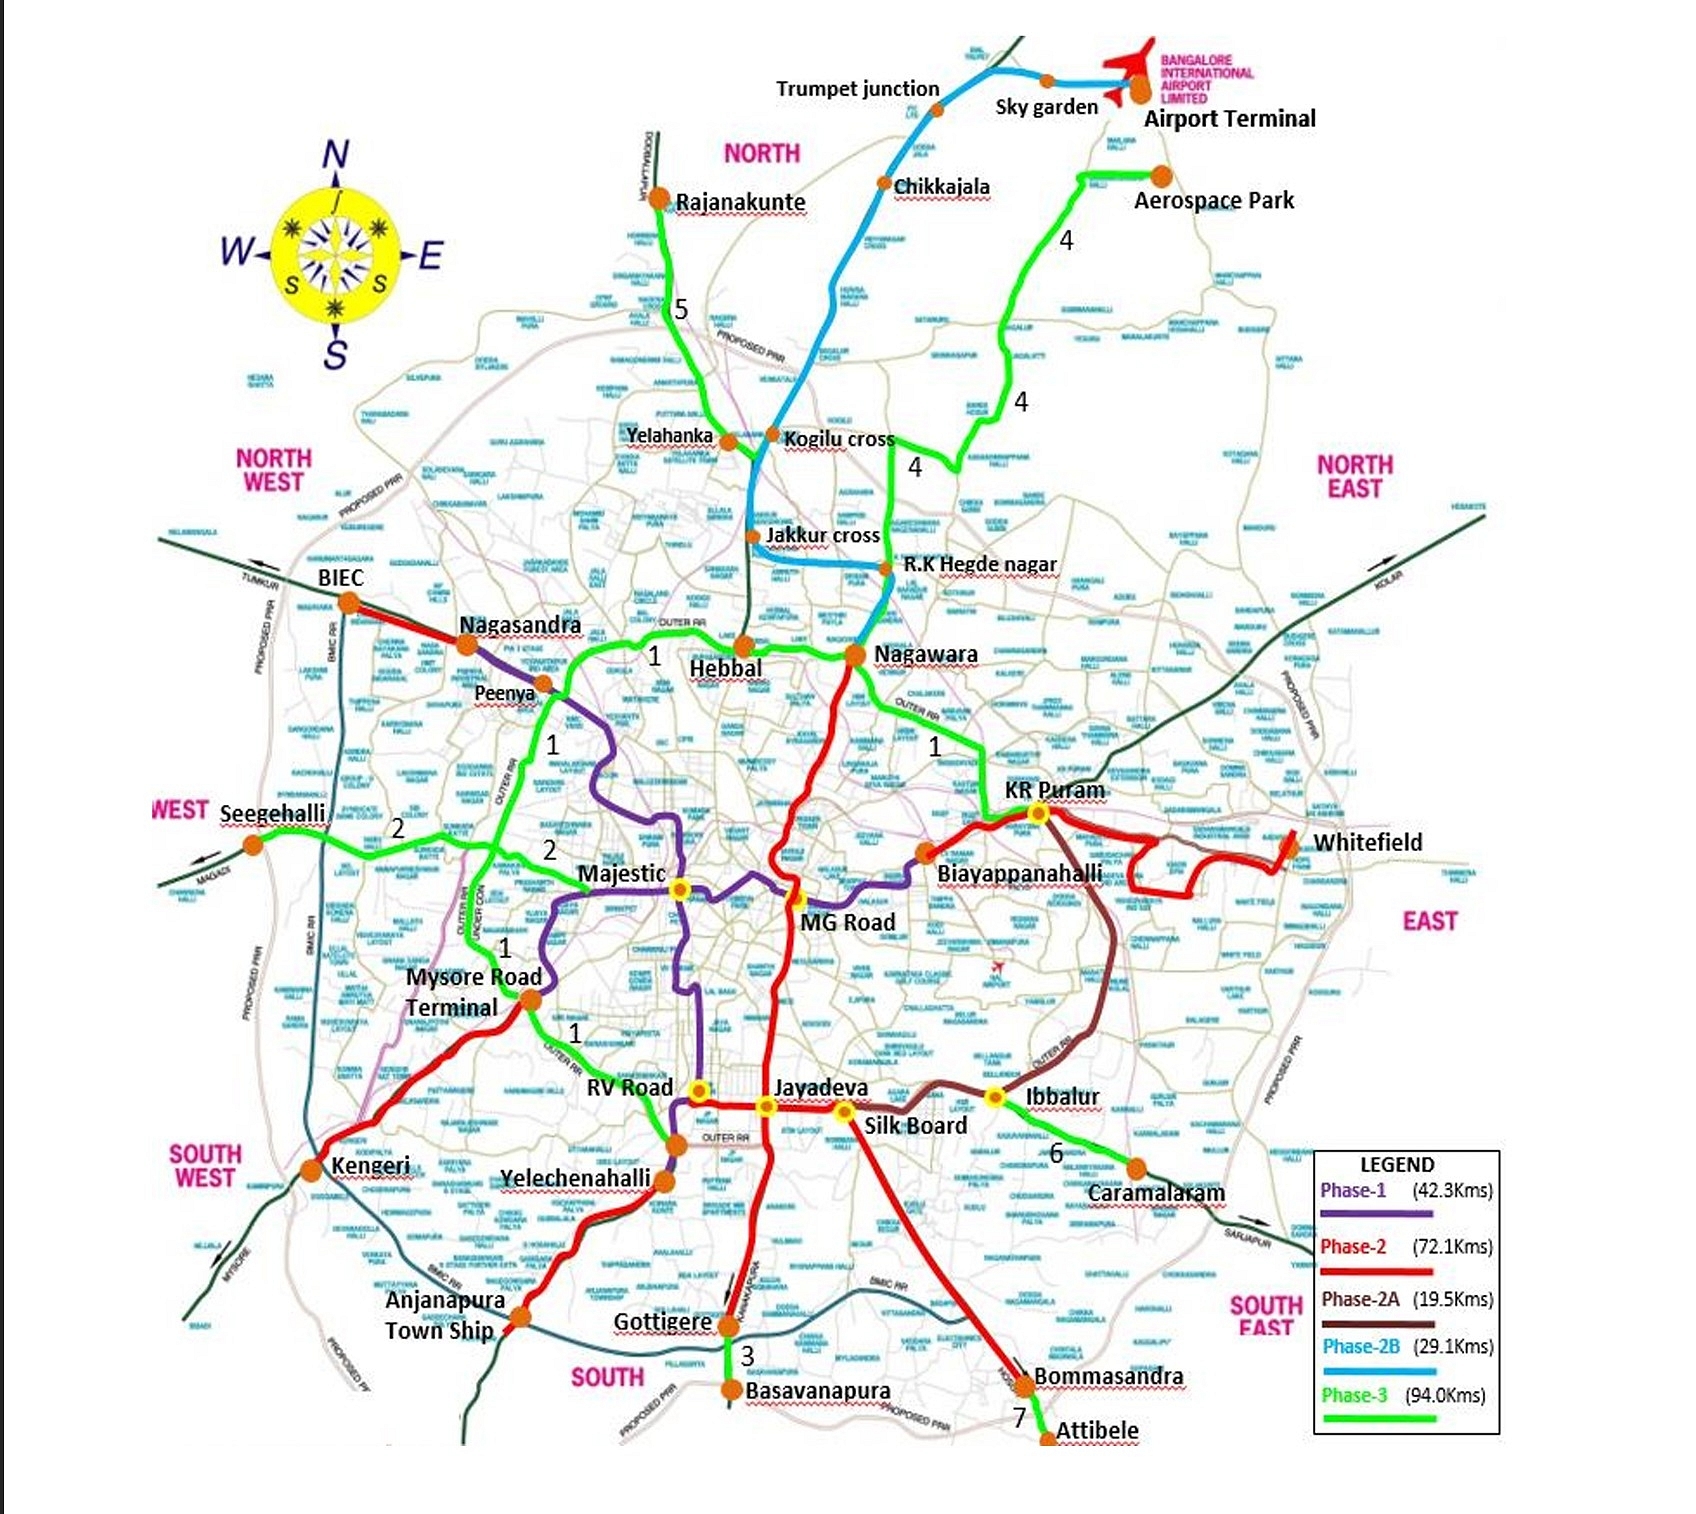 Why does it take forever to build a 40 km metro line in Bangalore? - Quora